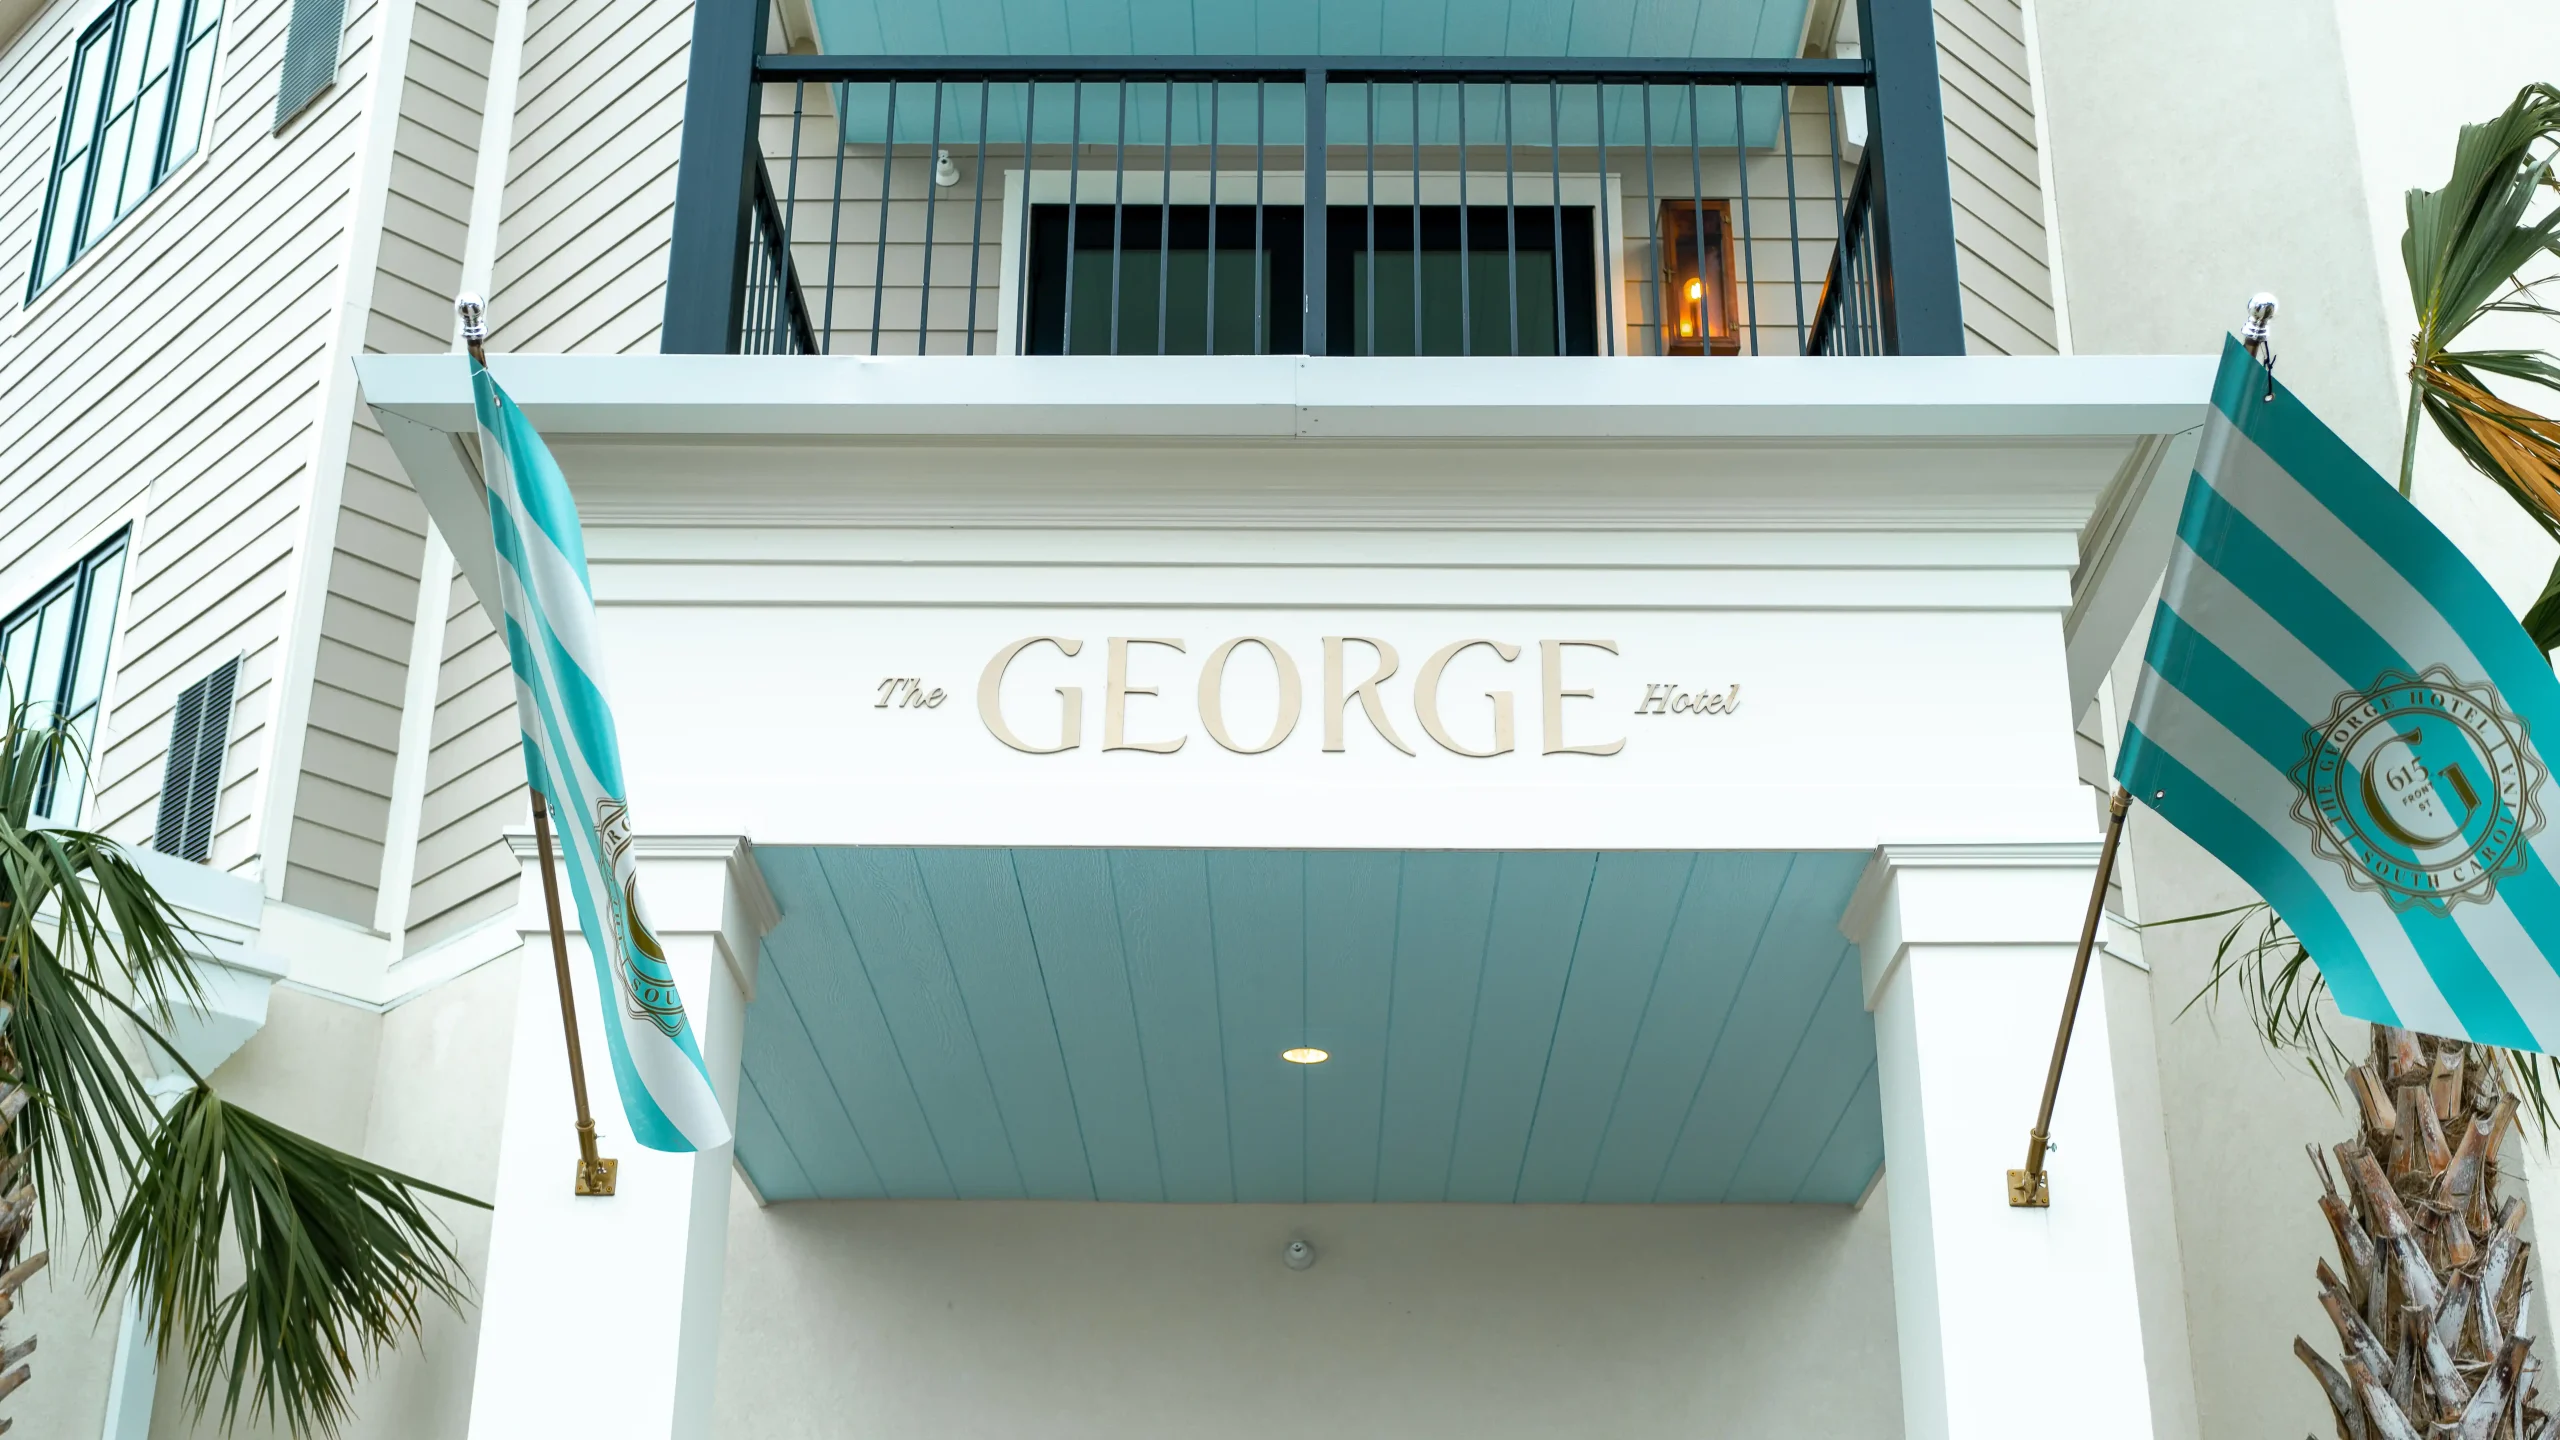 The George Hotel sign above the entrance. The George Hotel in Georgetown, South Carolina.